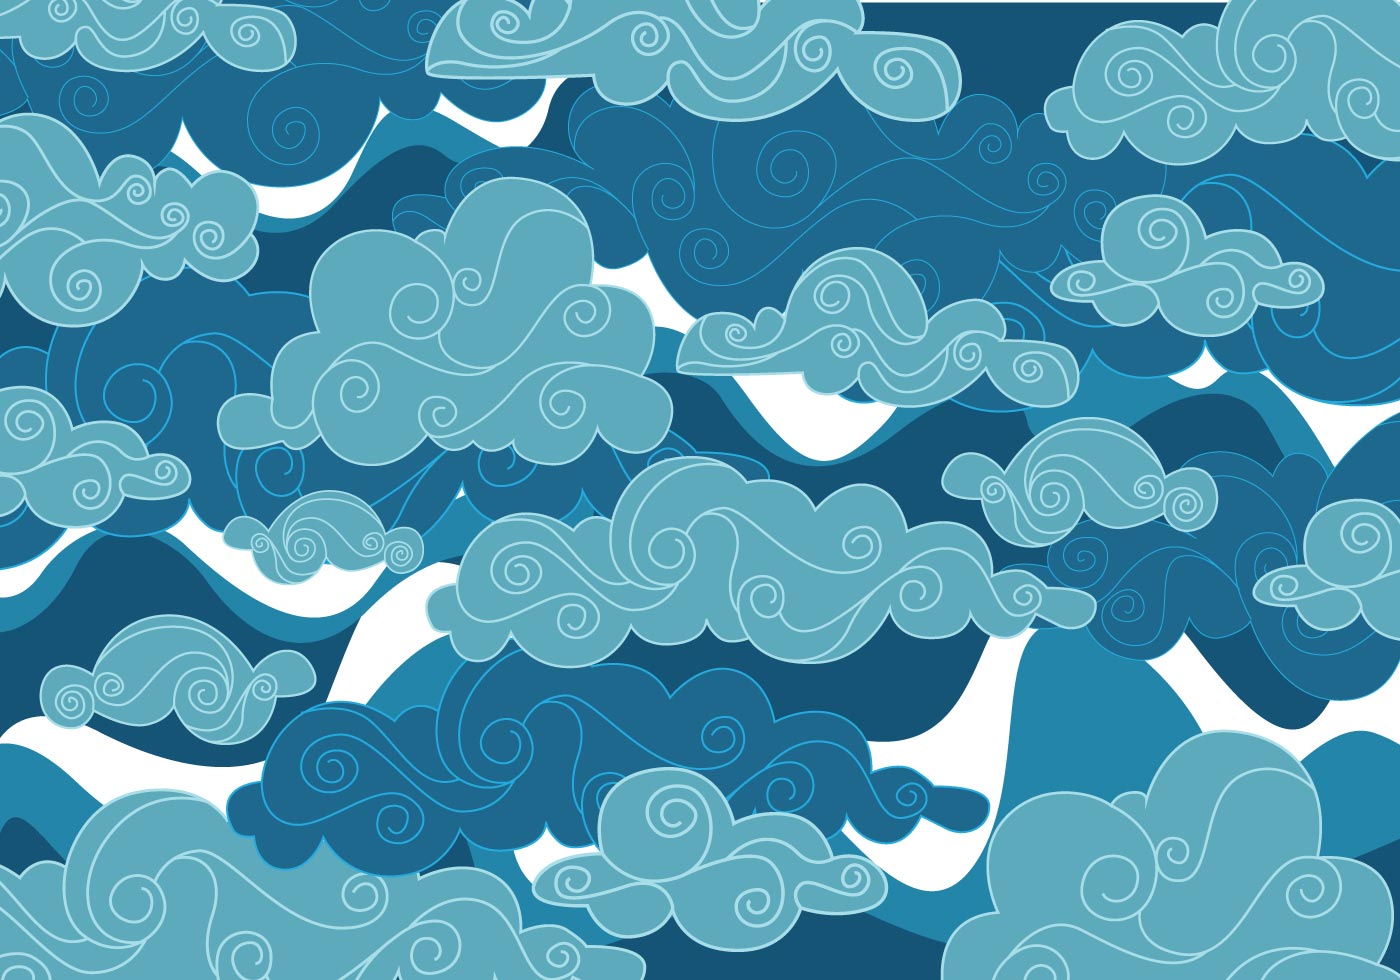 Download Chinese Clouds Vector - Download Free Vectors, Clipart ...